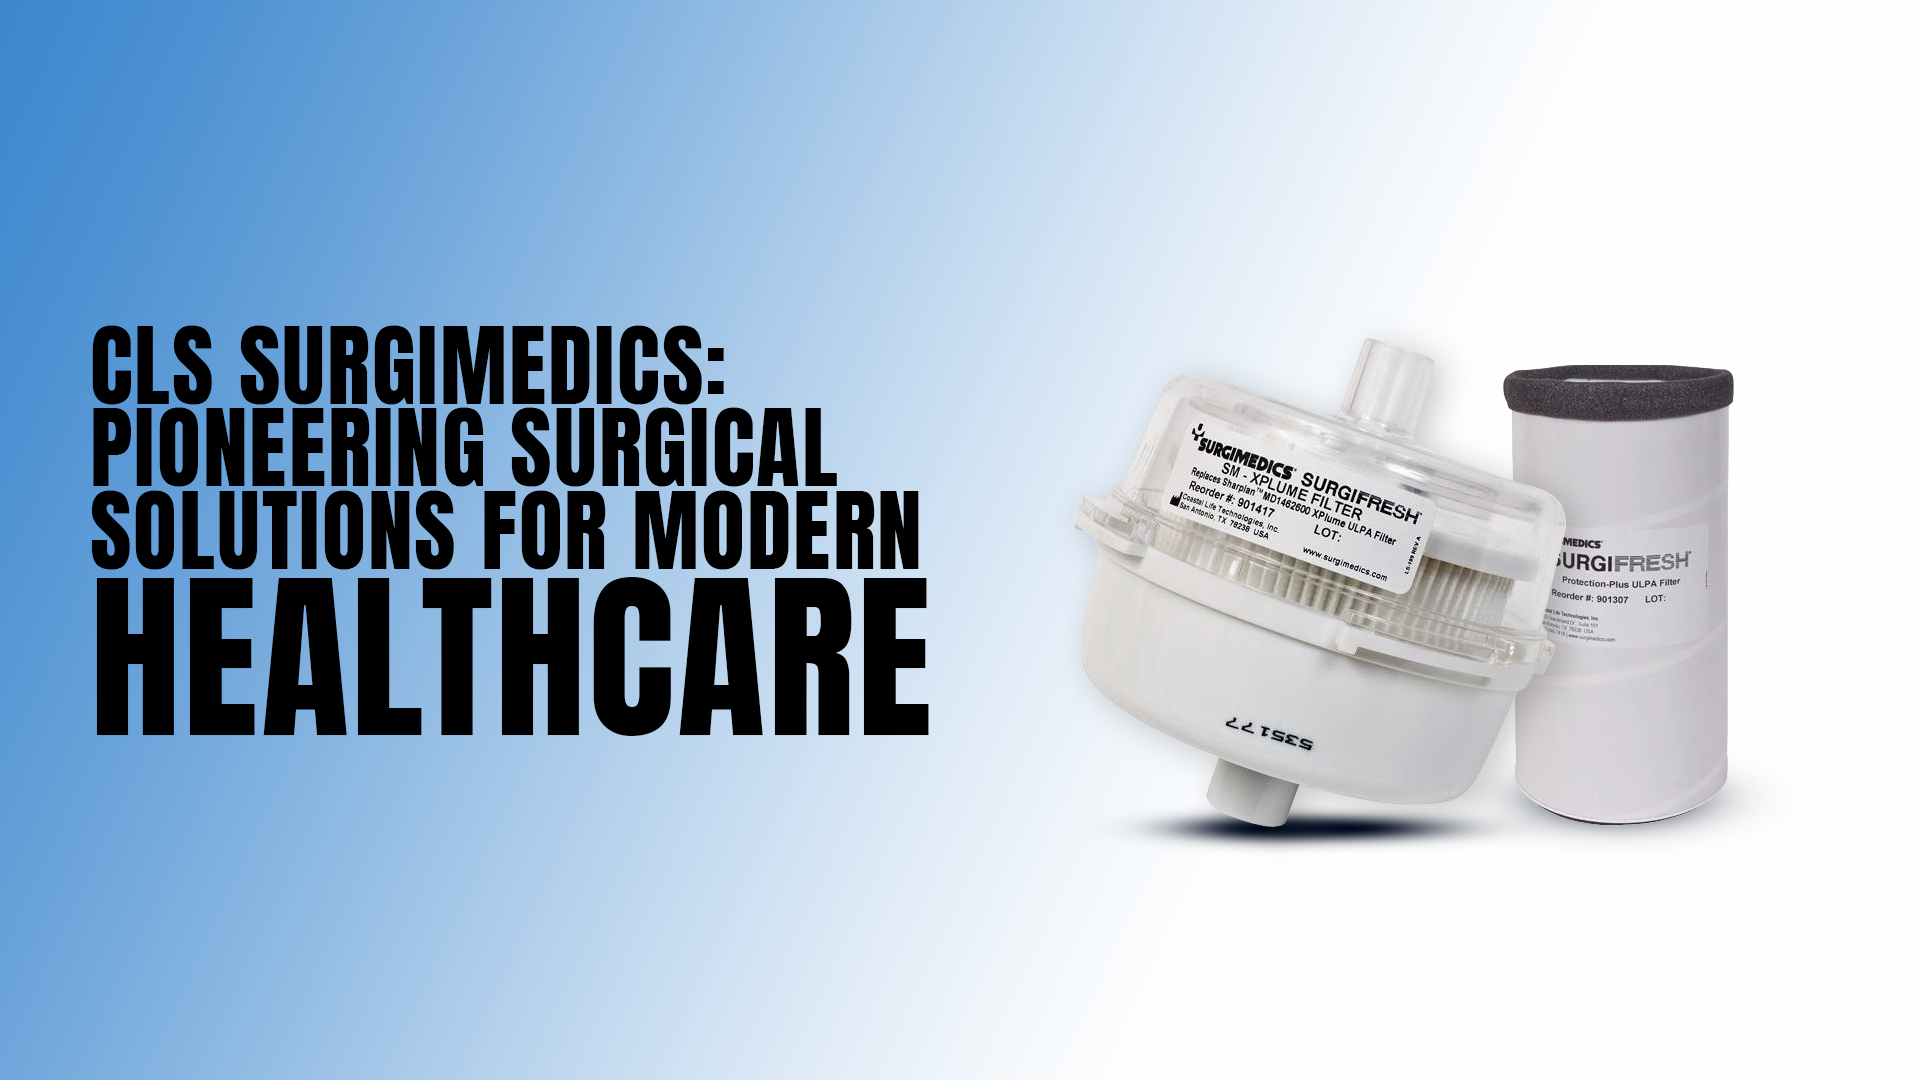 CLS Surgimedics: Pioneering Surgical Solutions for Modern Healthcare at MFI Medical